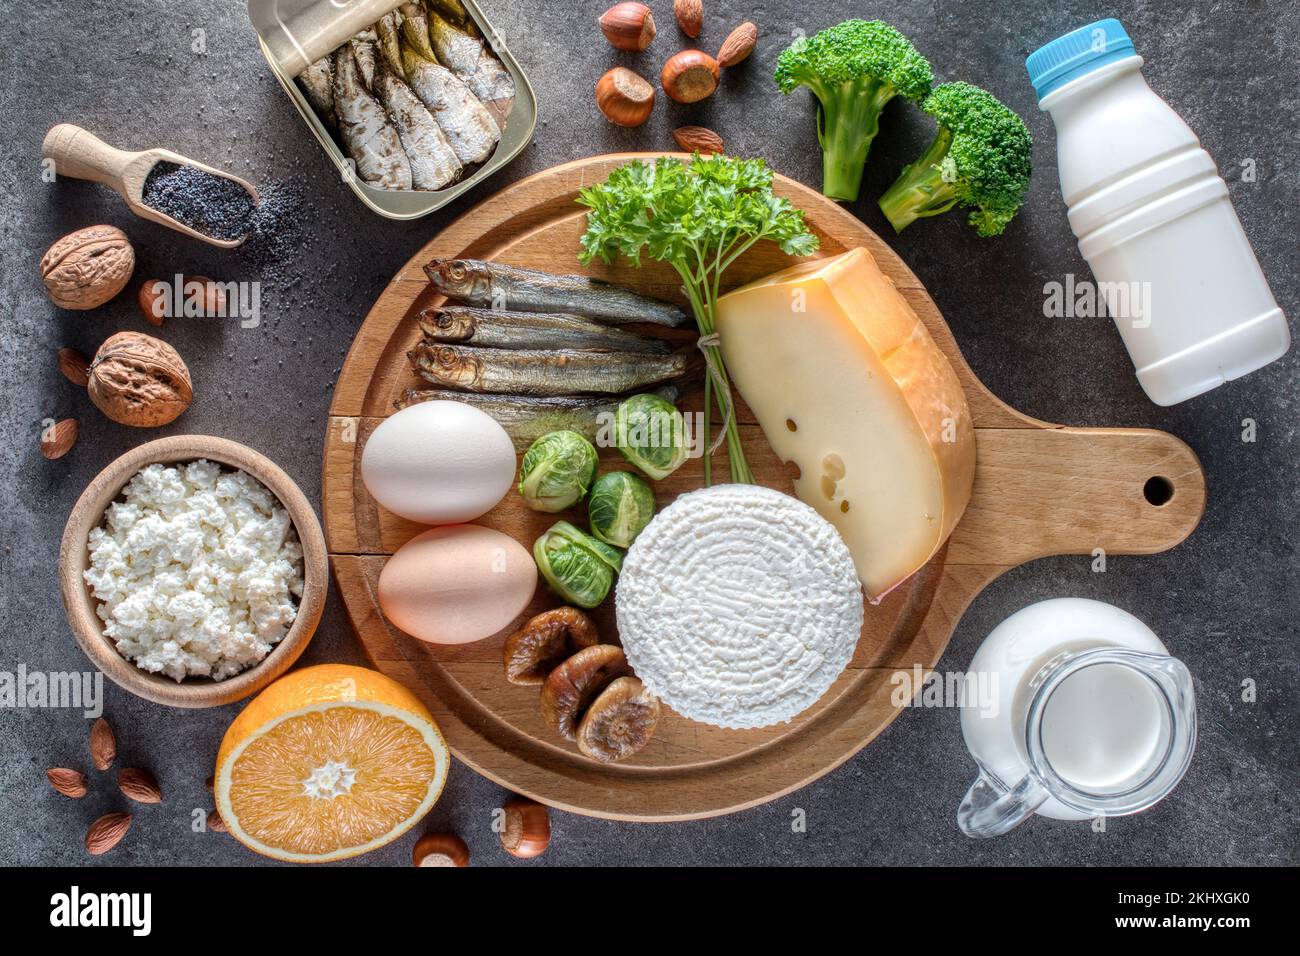 Osteoporosis concept. Food products recommended for osteoporosis, diary and non-diary products rich in calcium. Stock Photo